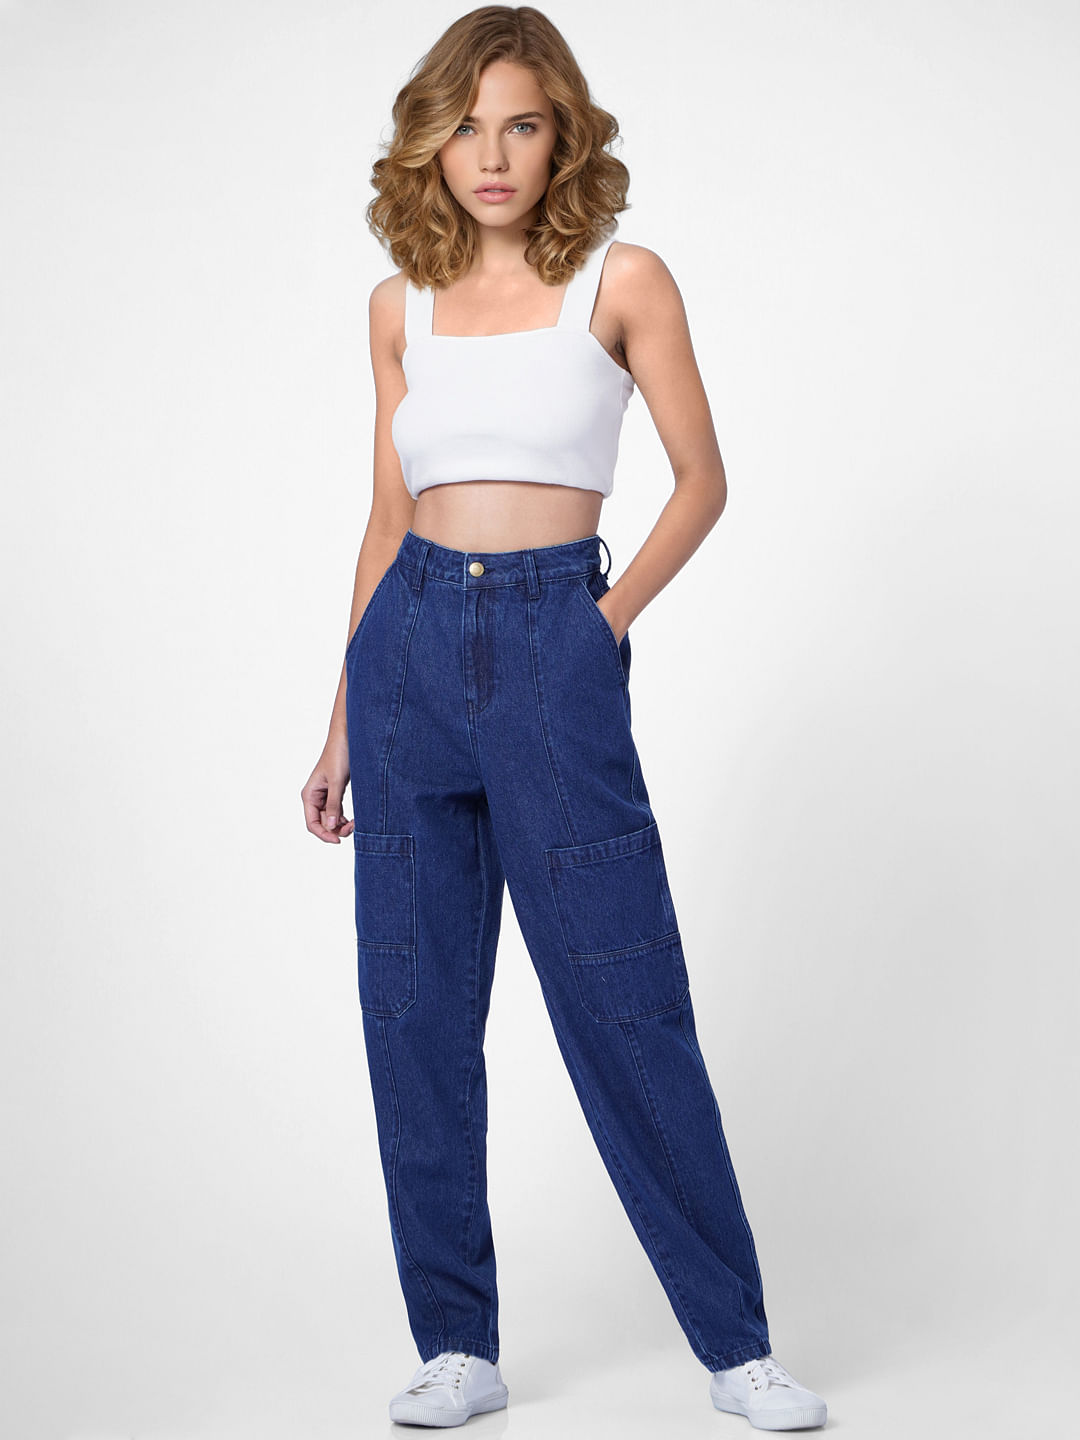 41 Best High Waisted Trousers ideas  high waisted trousers trousers pants